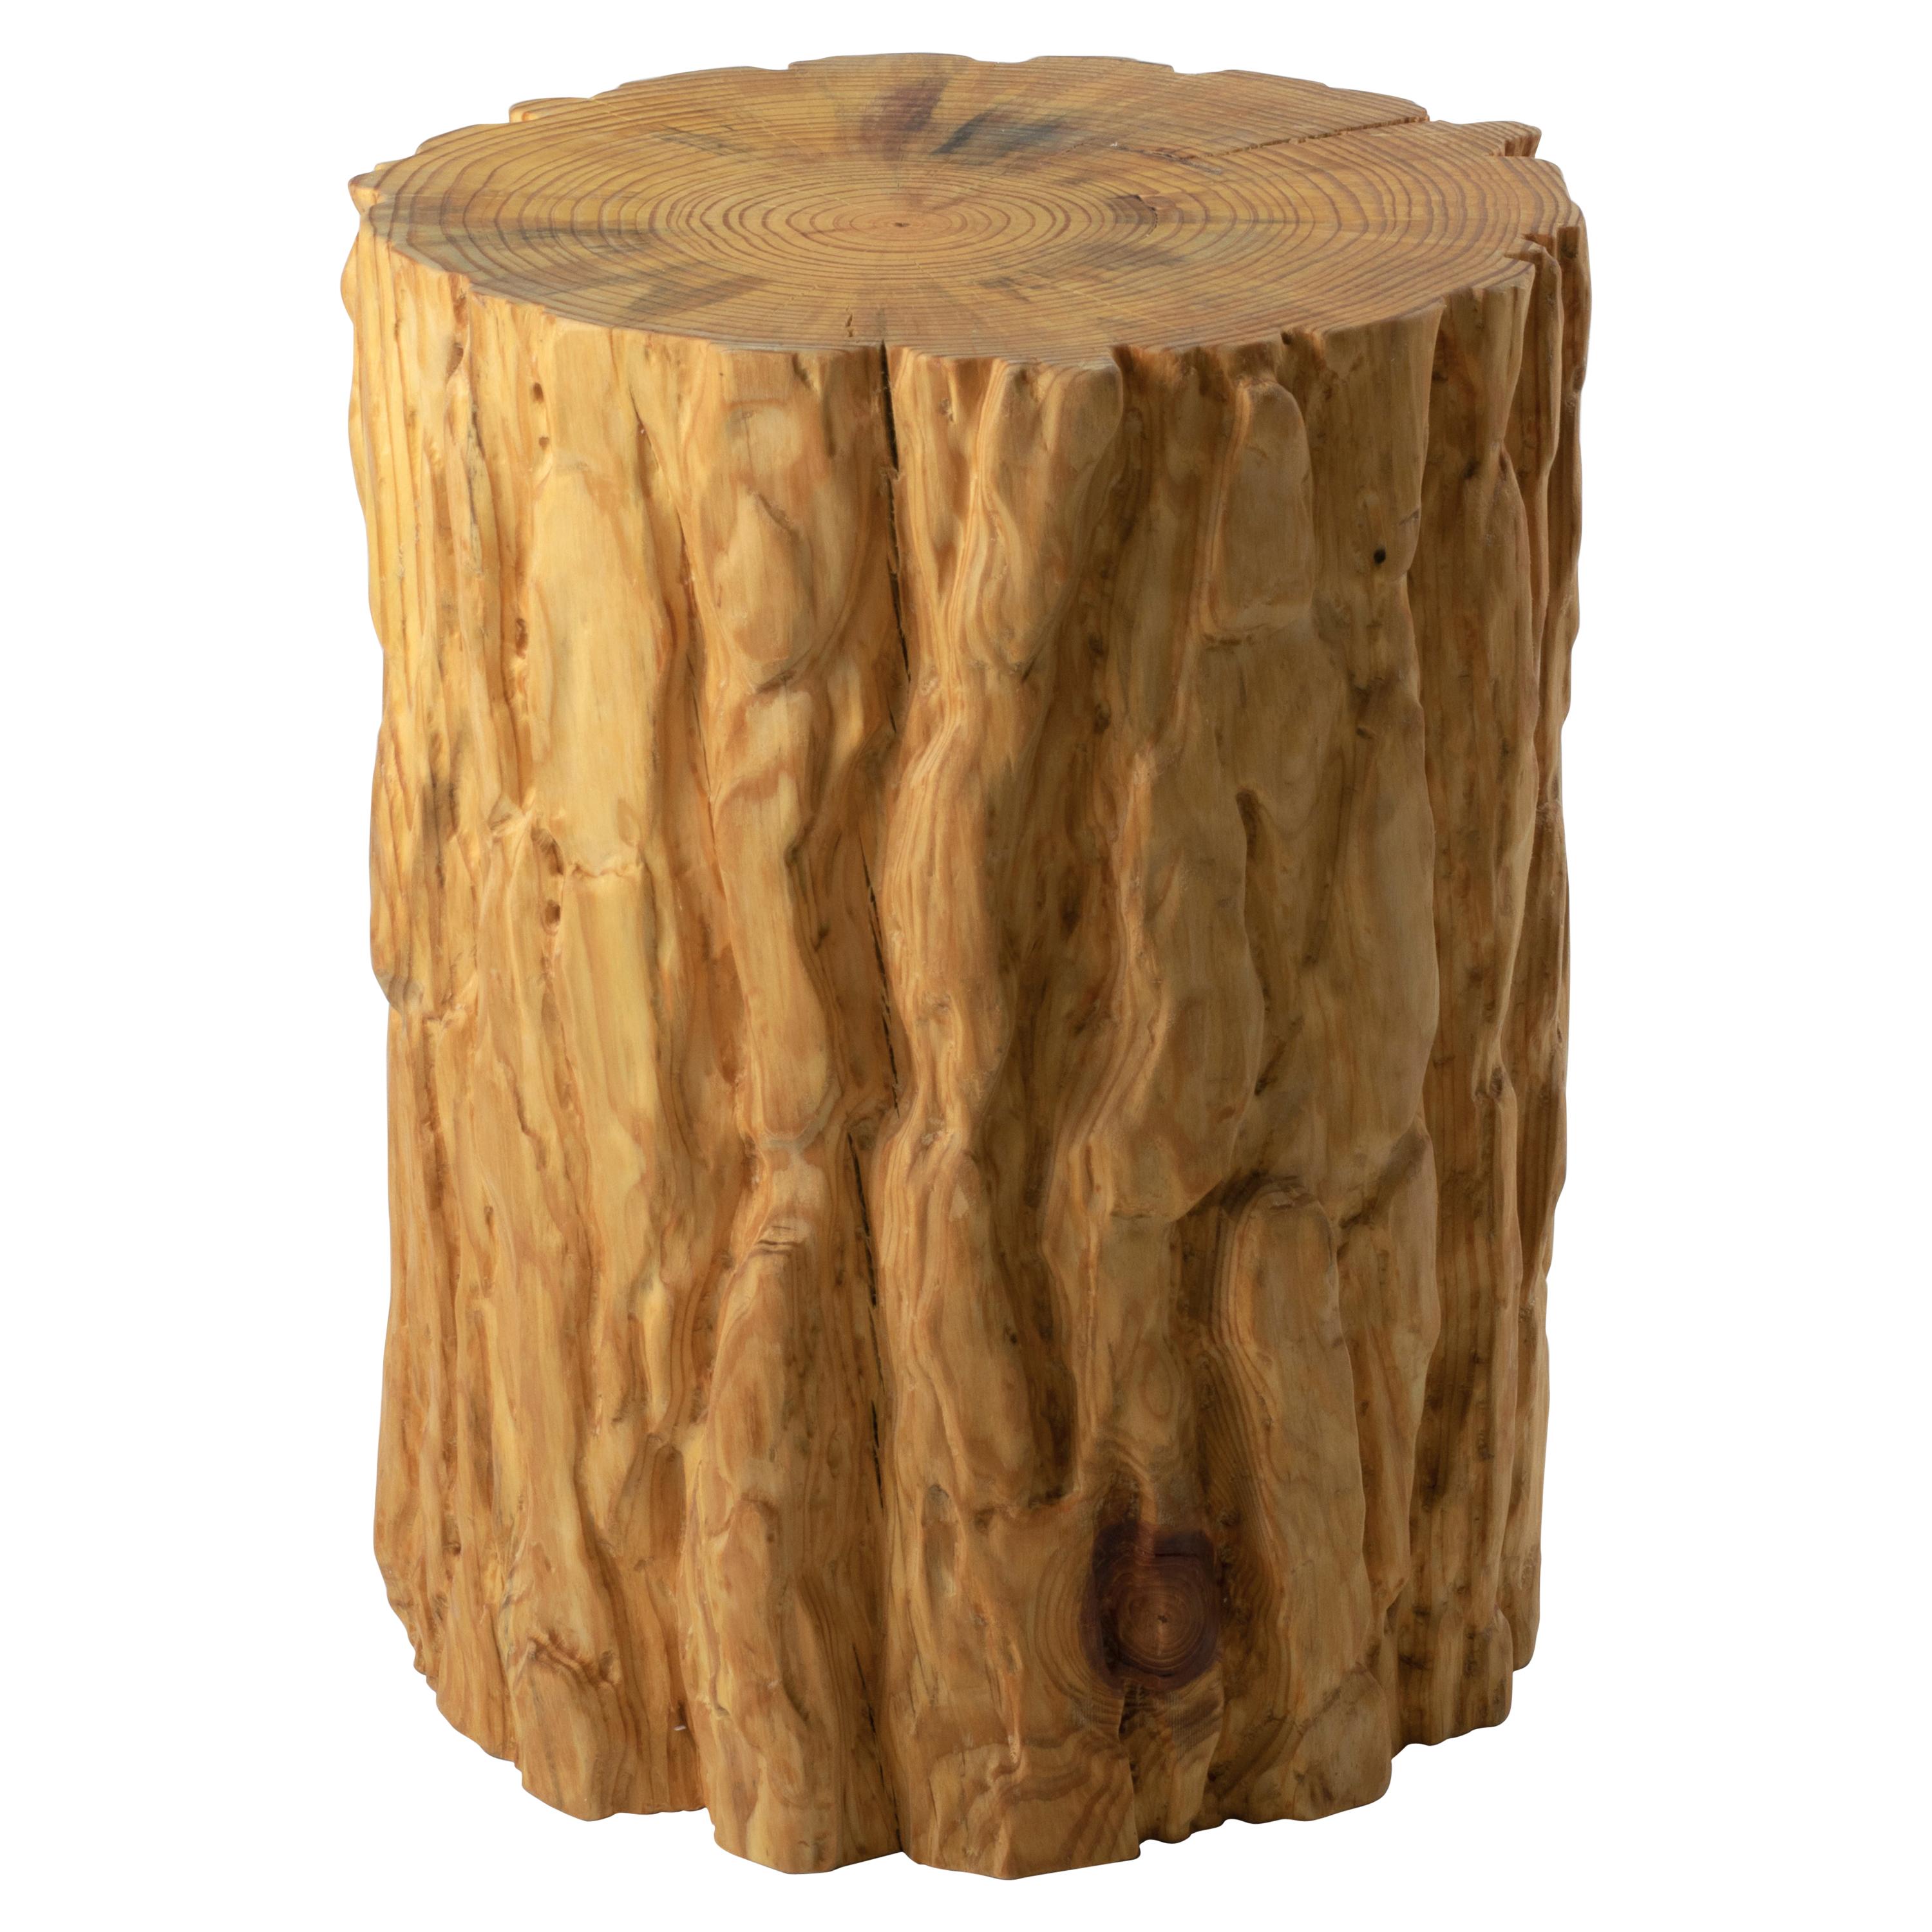 Zero Bark Map Stool by Timbur, Represented by Tuleste Factory